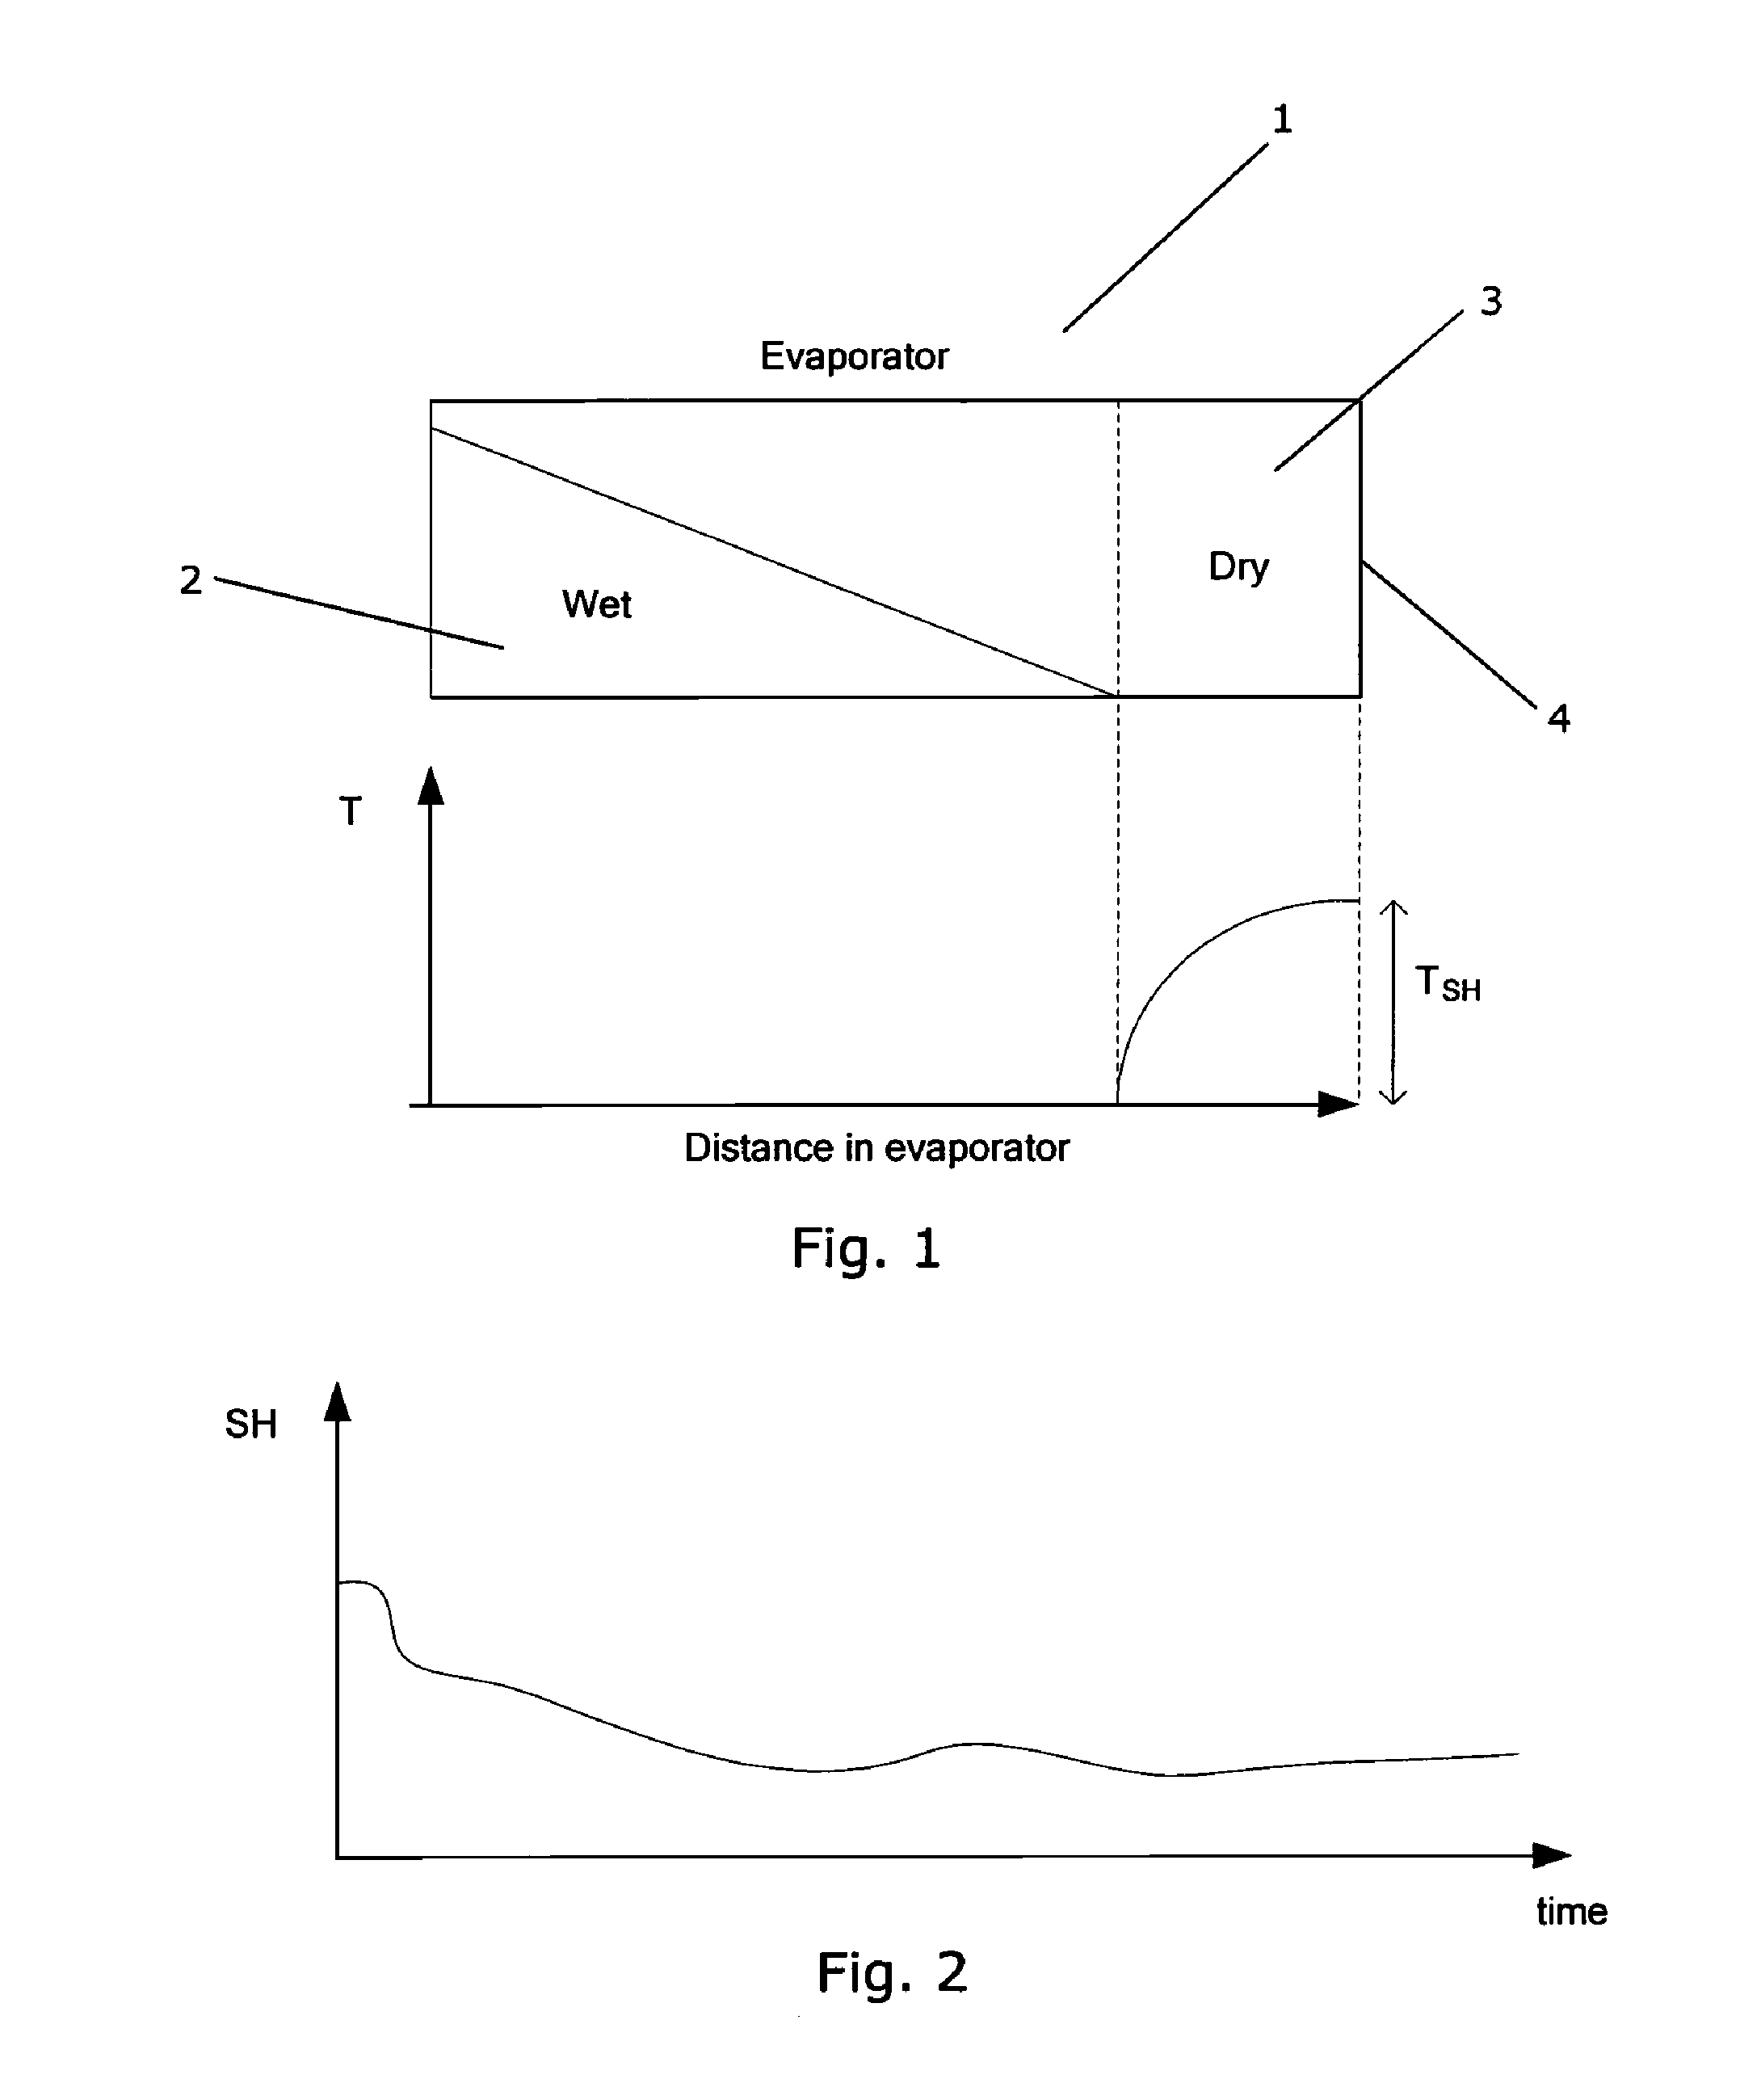 Method for controlling a flow of refrigerant to an evaporator